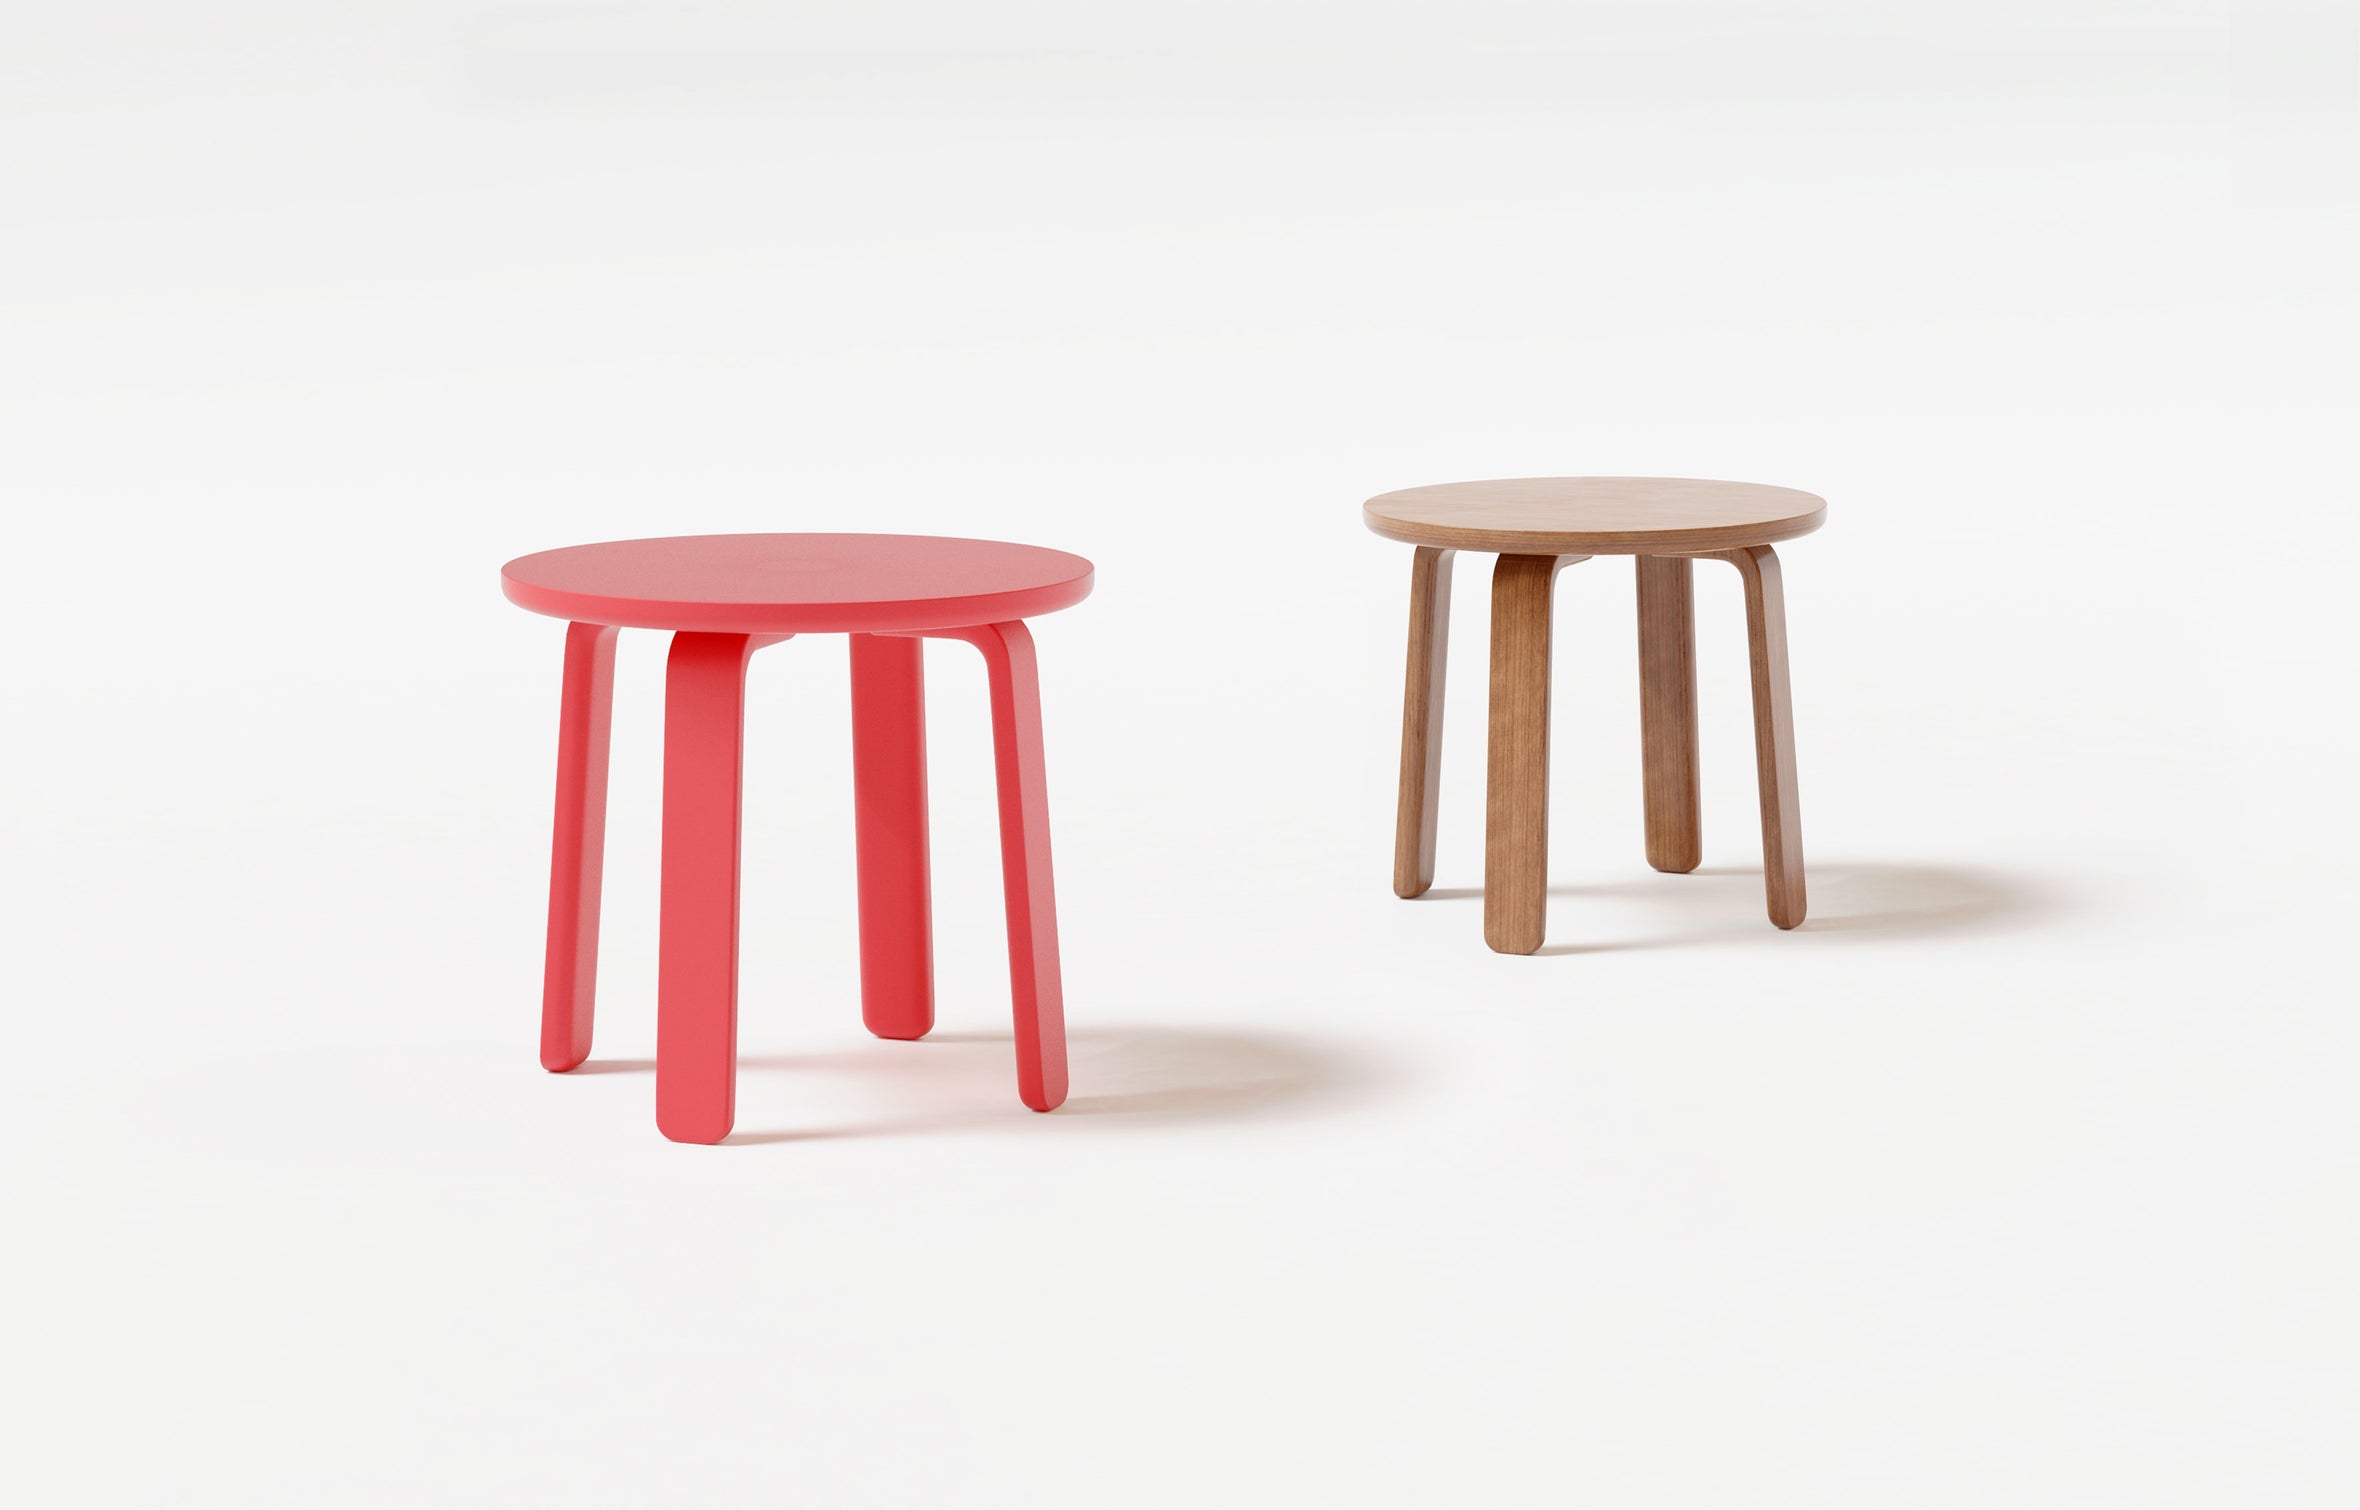 Lollipop Side Tables in a white room | ff&e dorm furniture manufacturers | Roomy | Chicago